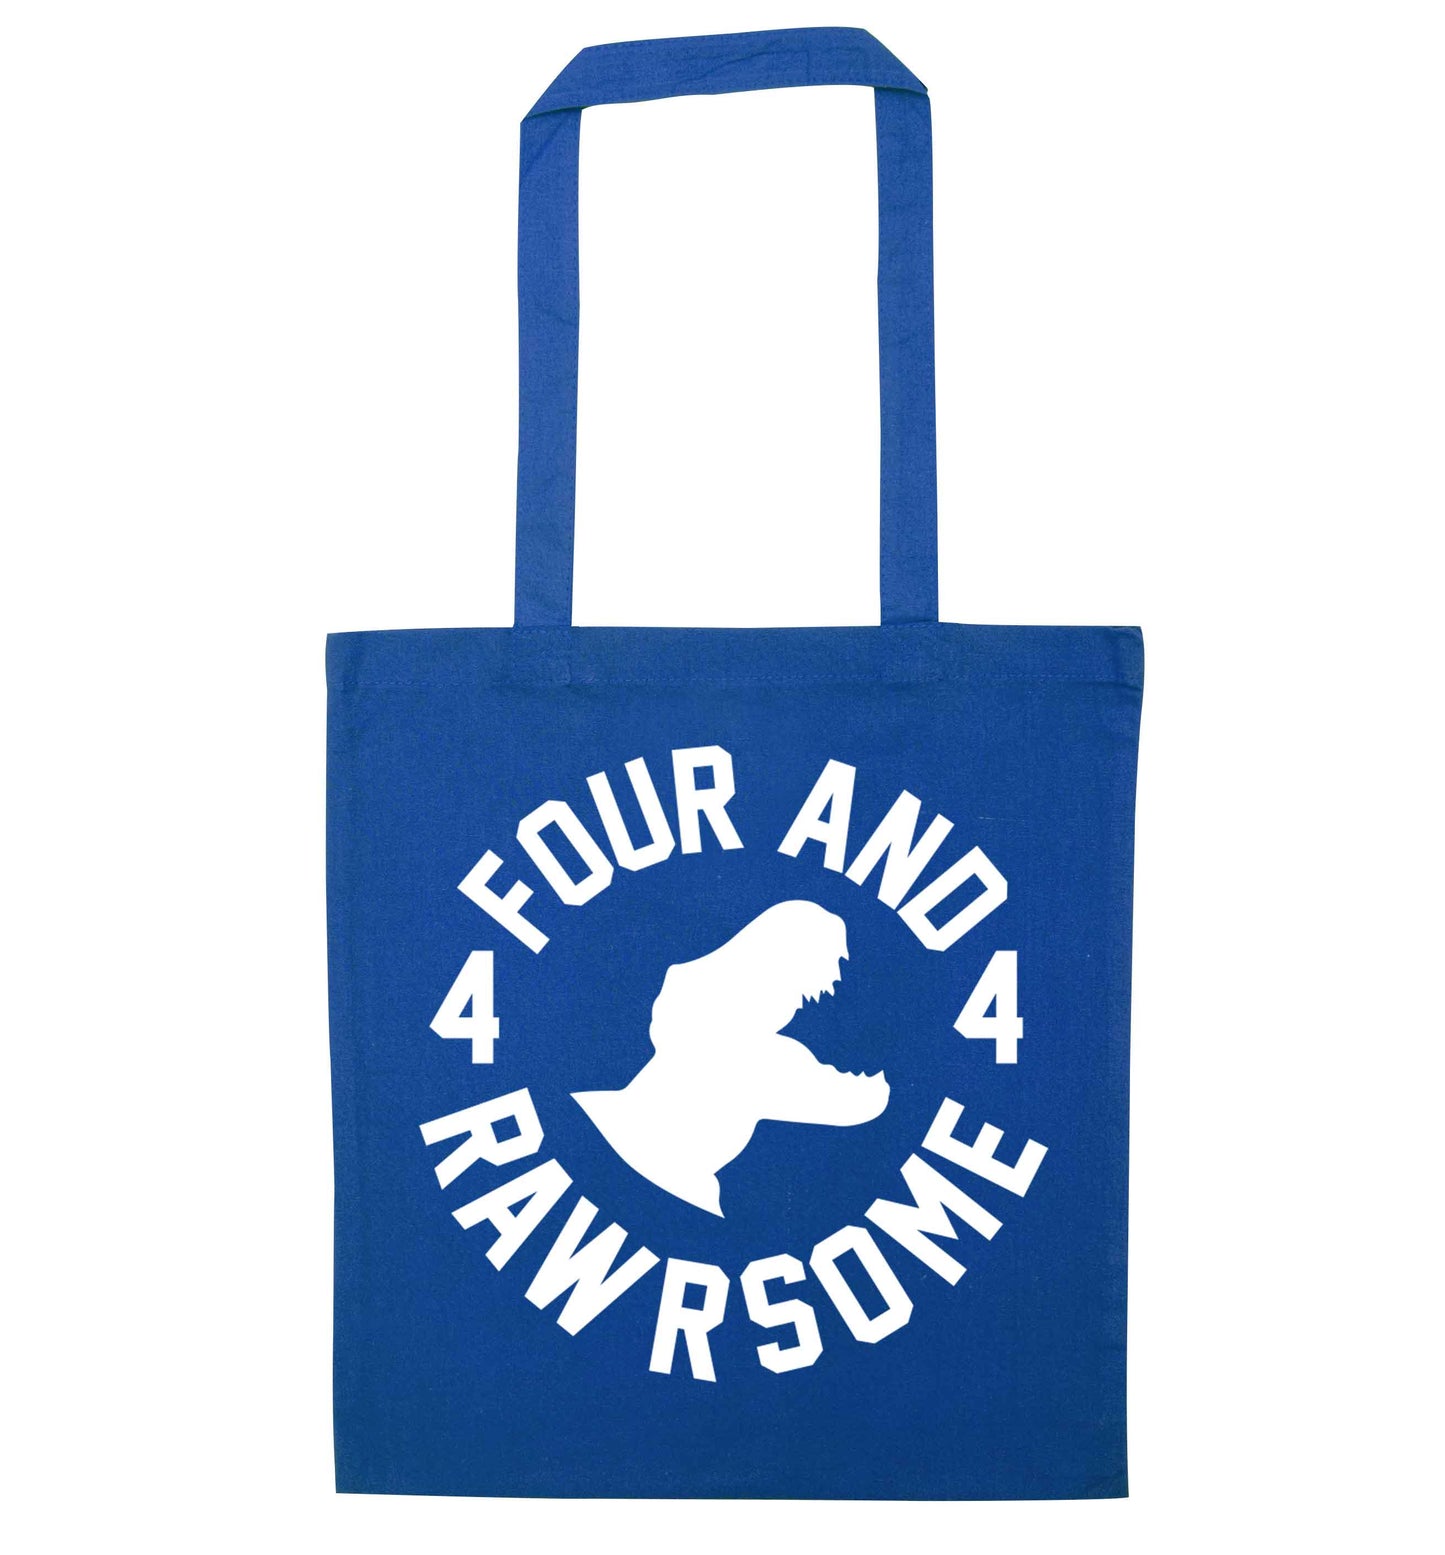 Four and rawrsome blue tote bag